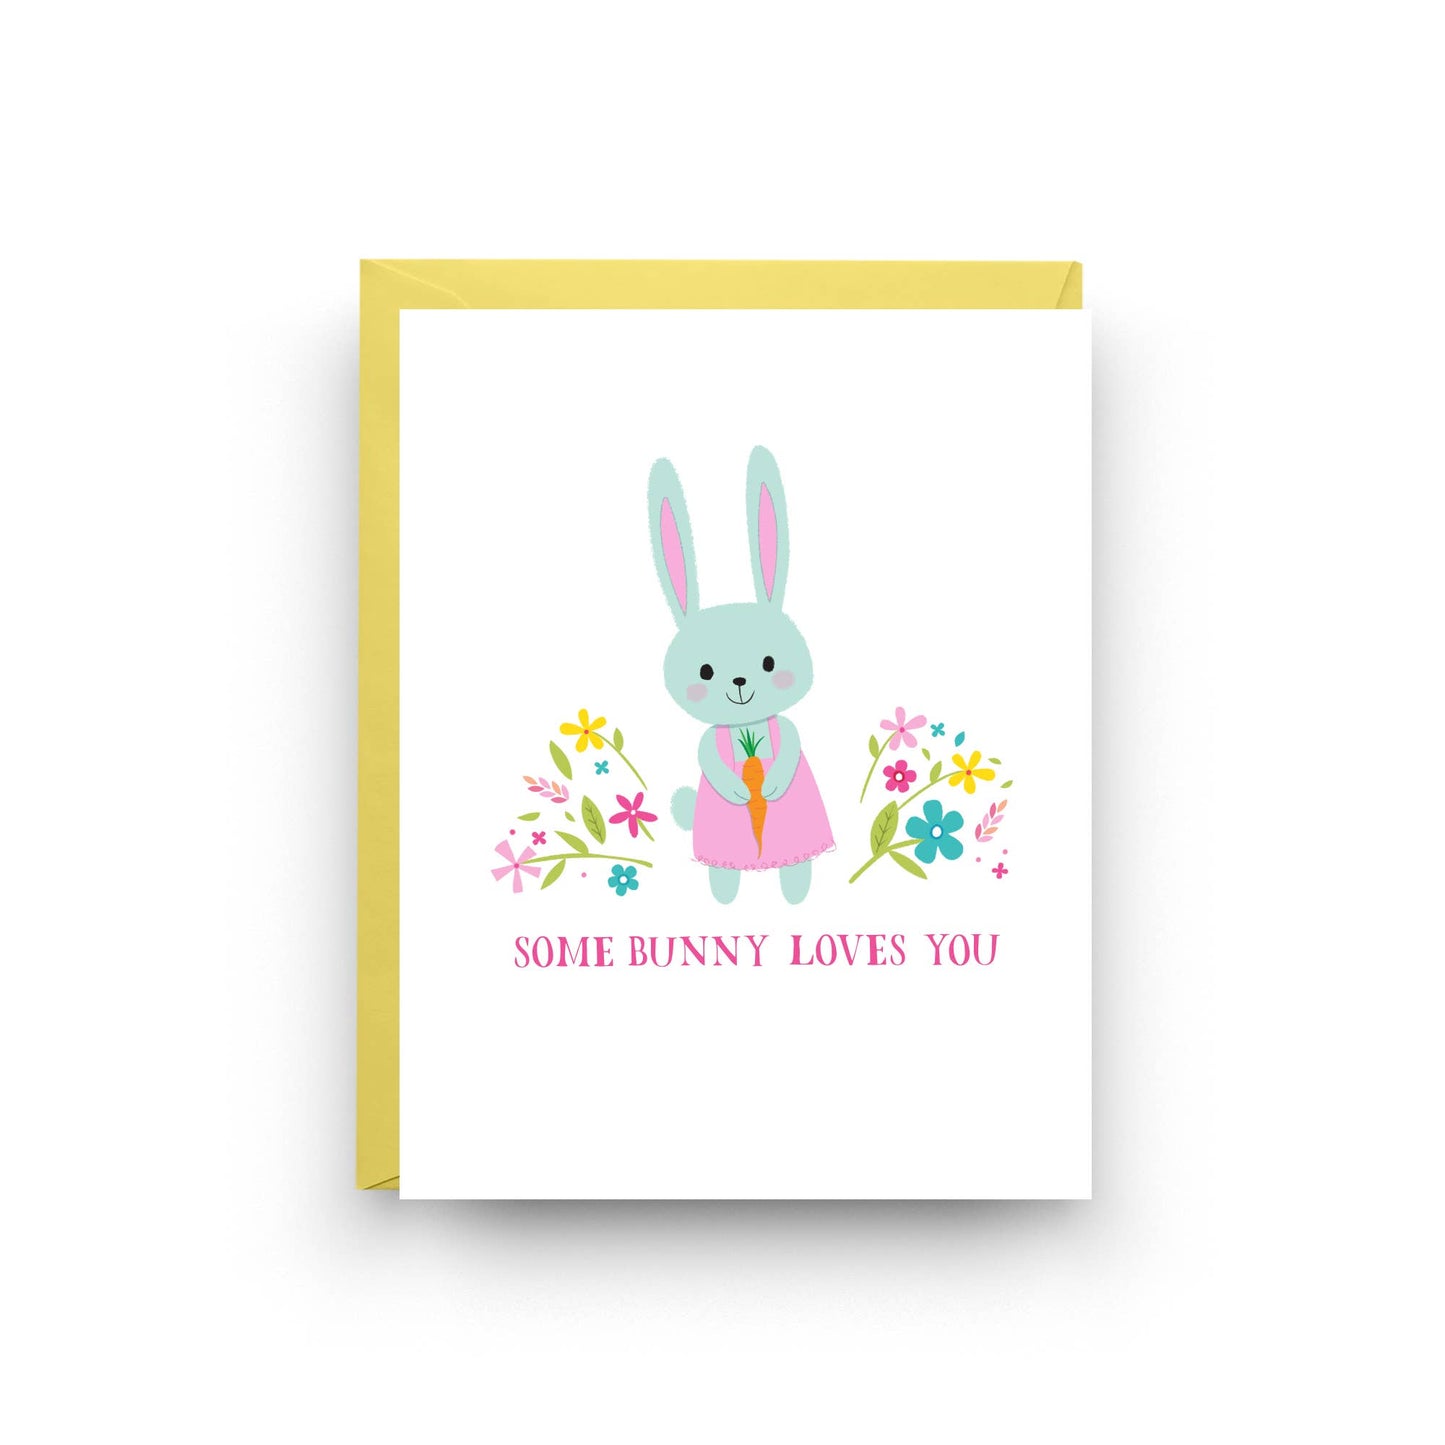 Some Bunny Loves You - Greeting Card - Mellow Monkey